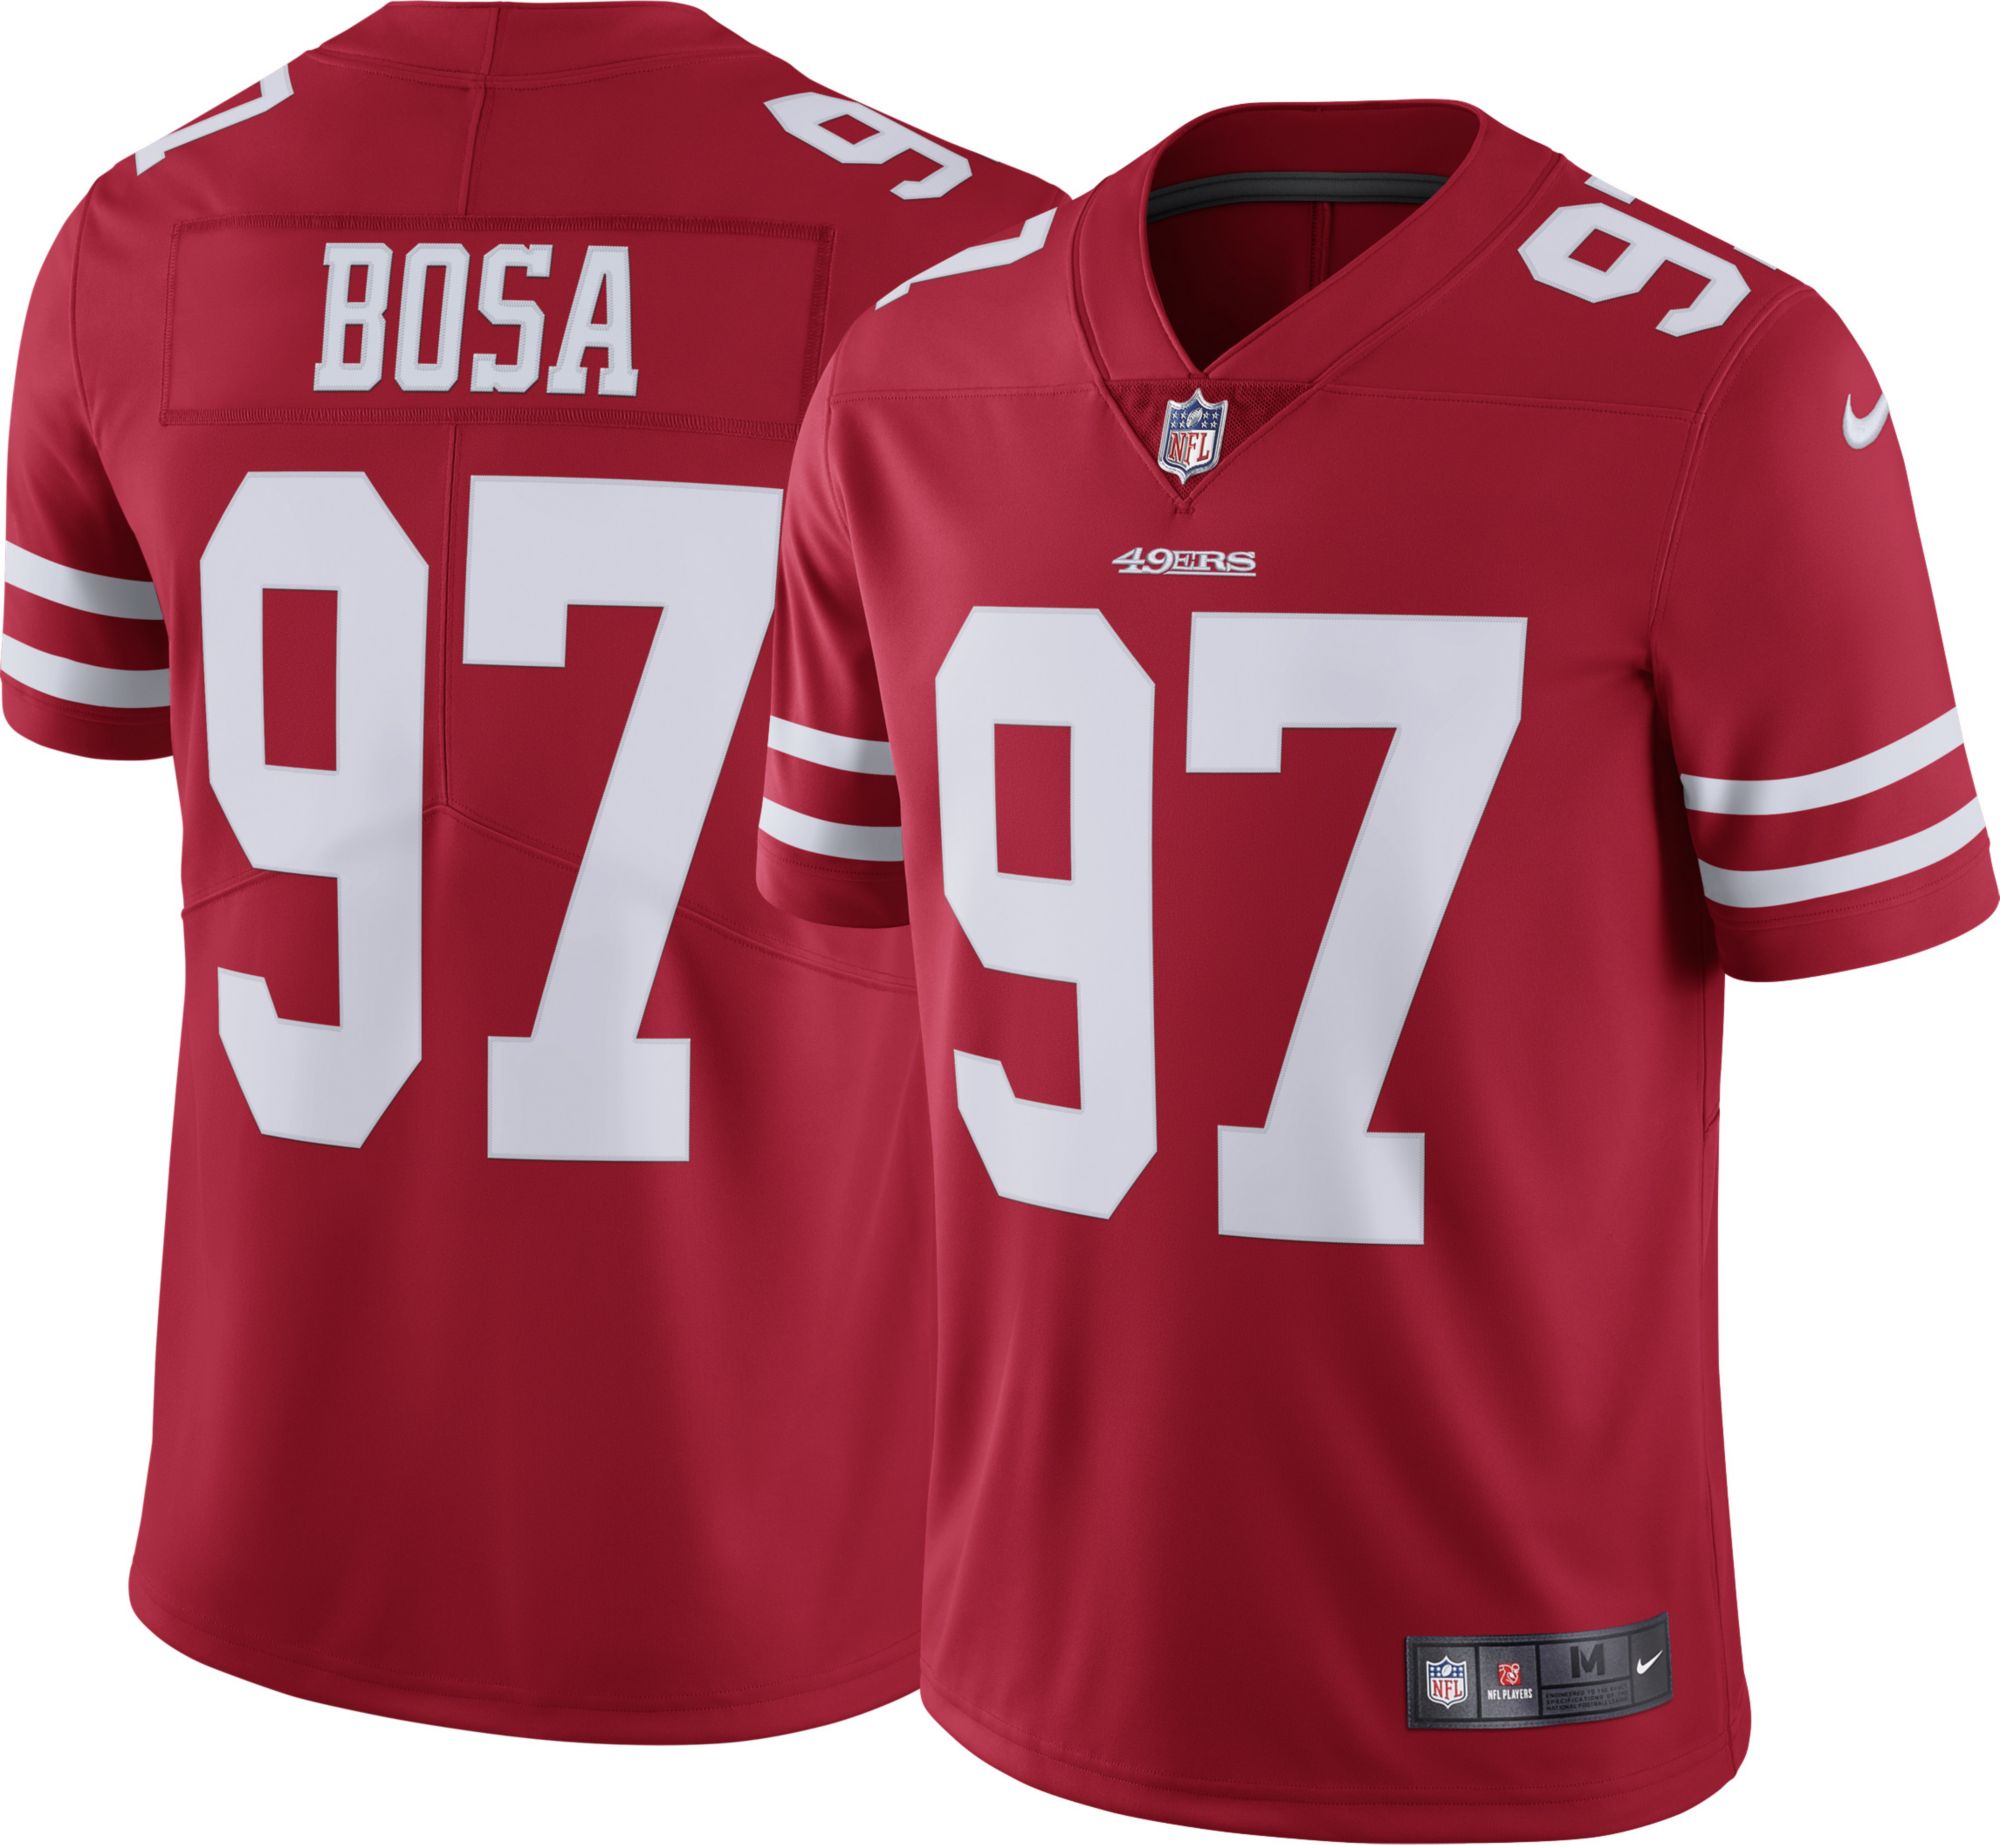 49ers jersey price